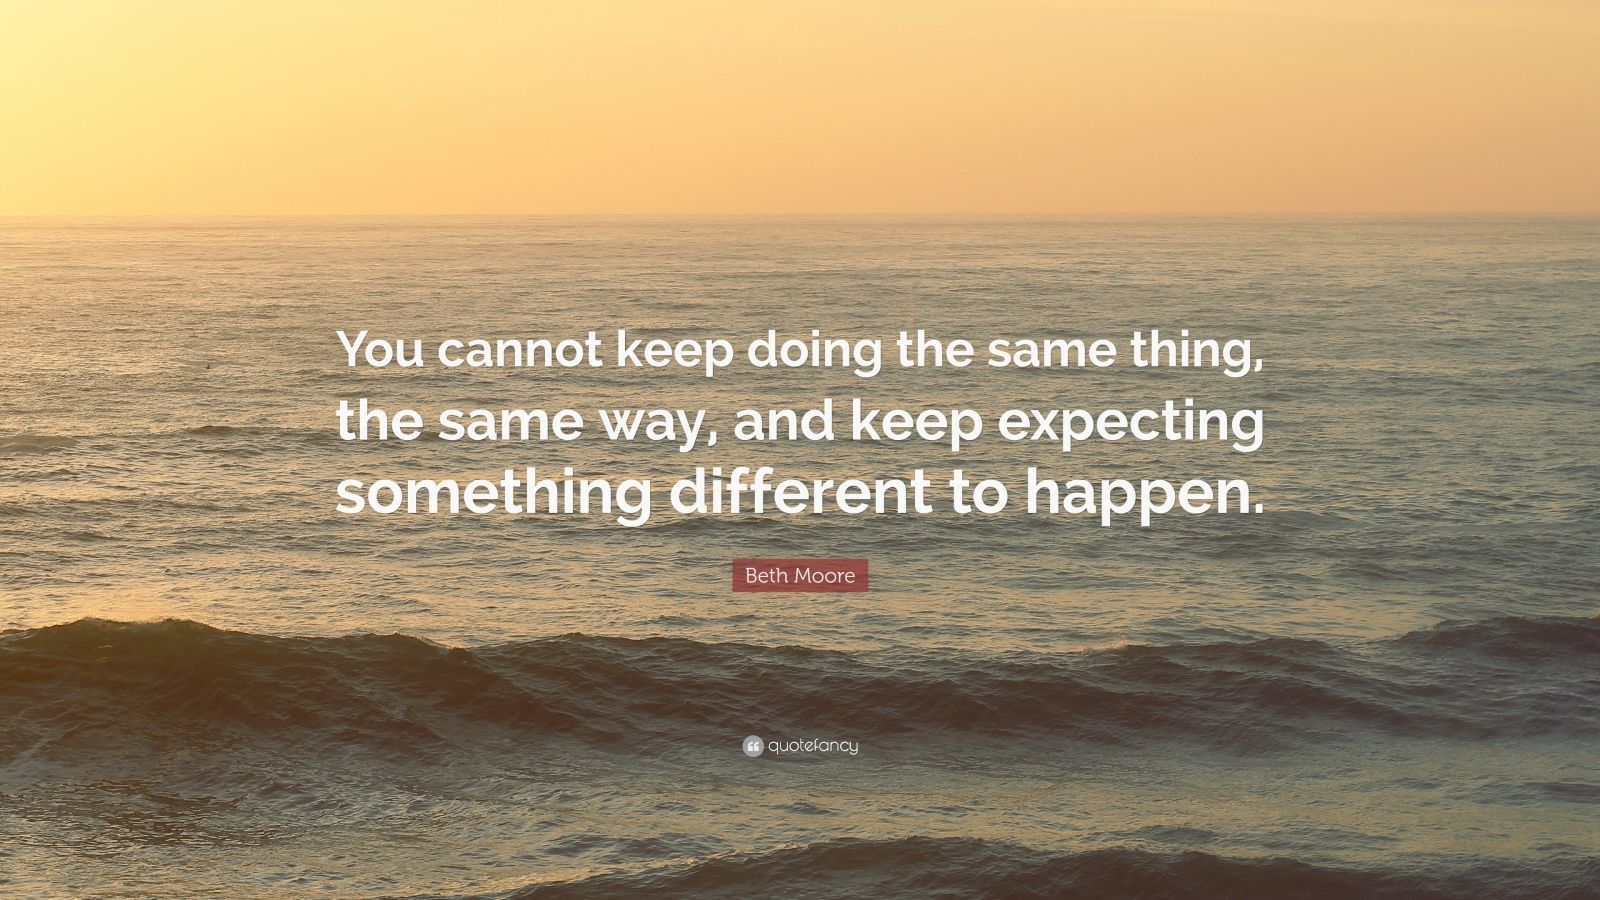 Beth Moore Quote: “You cannot keep doing the same thing, the same way ...